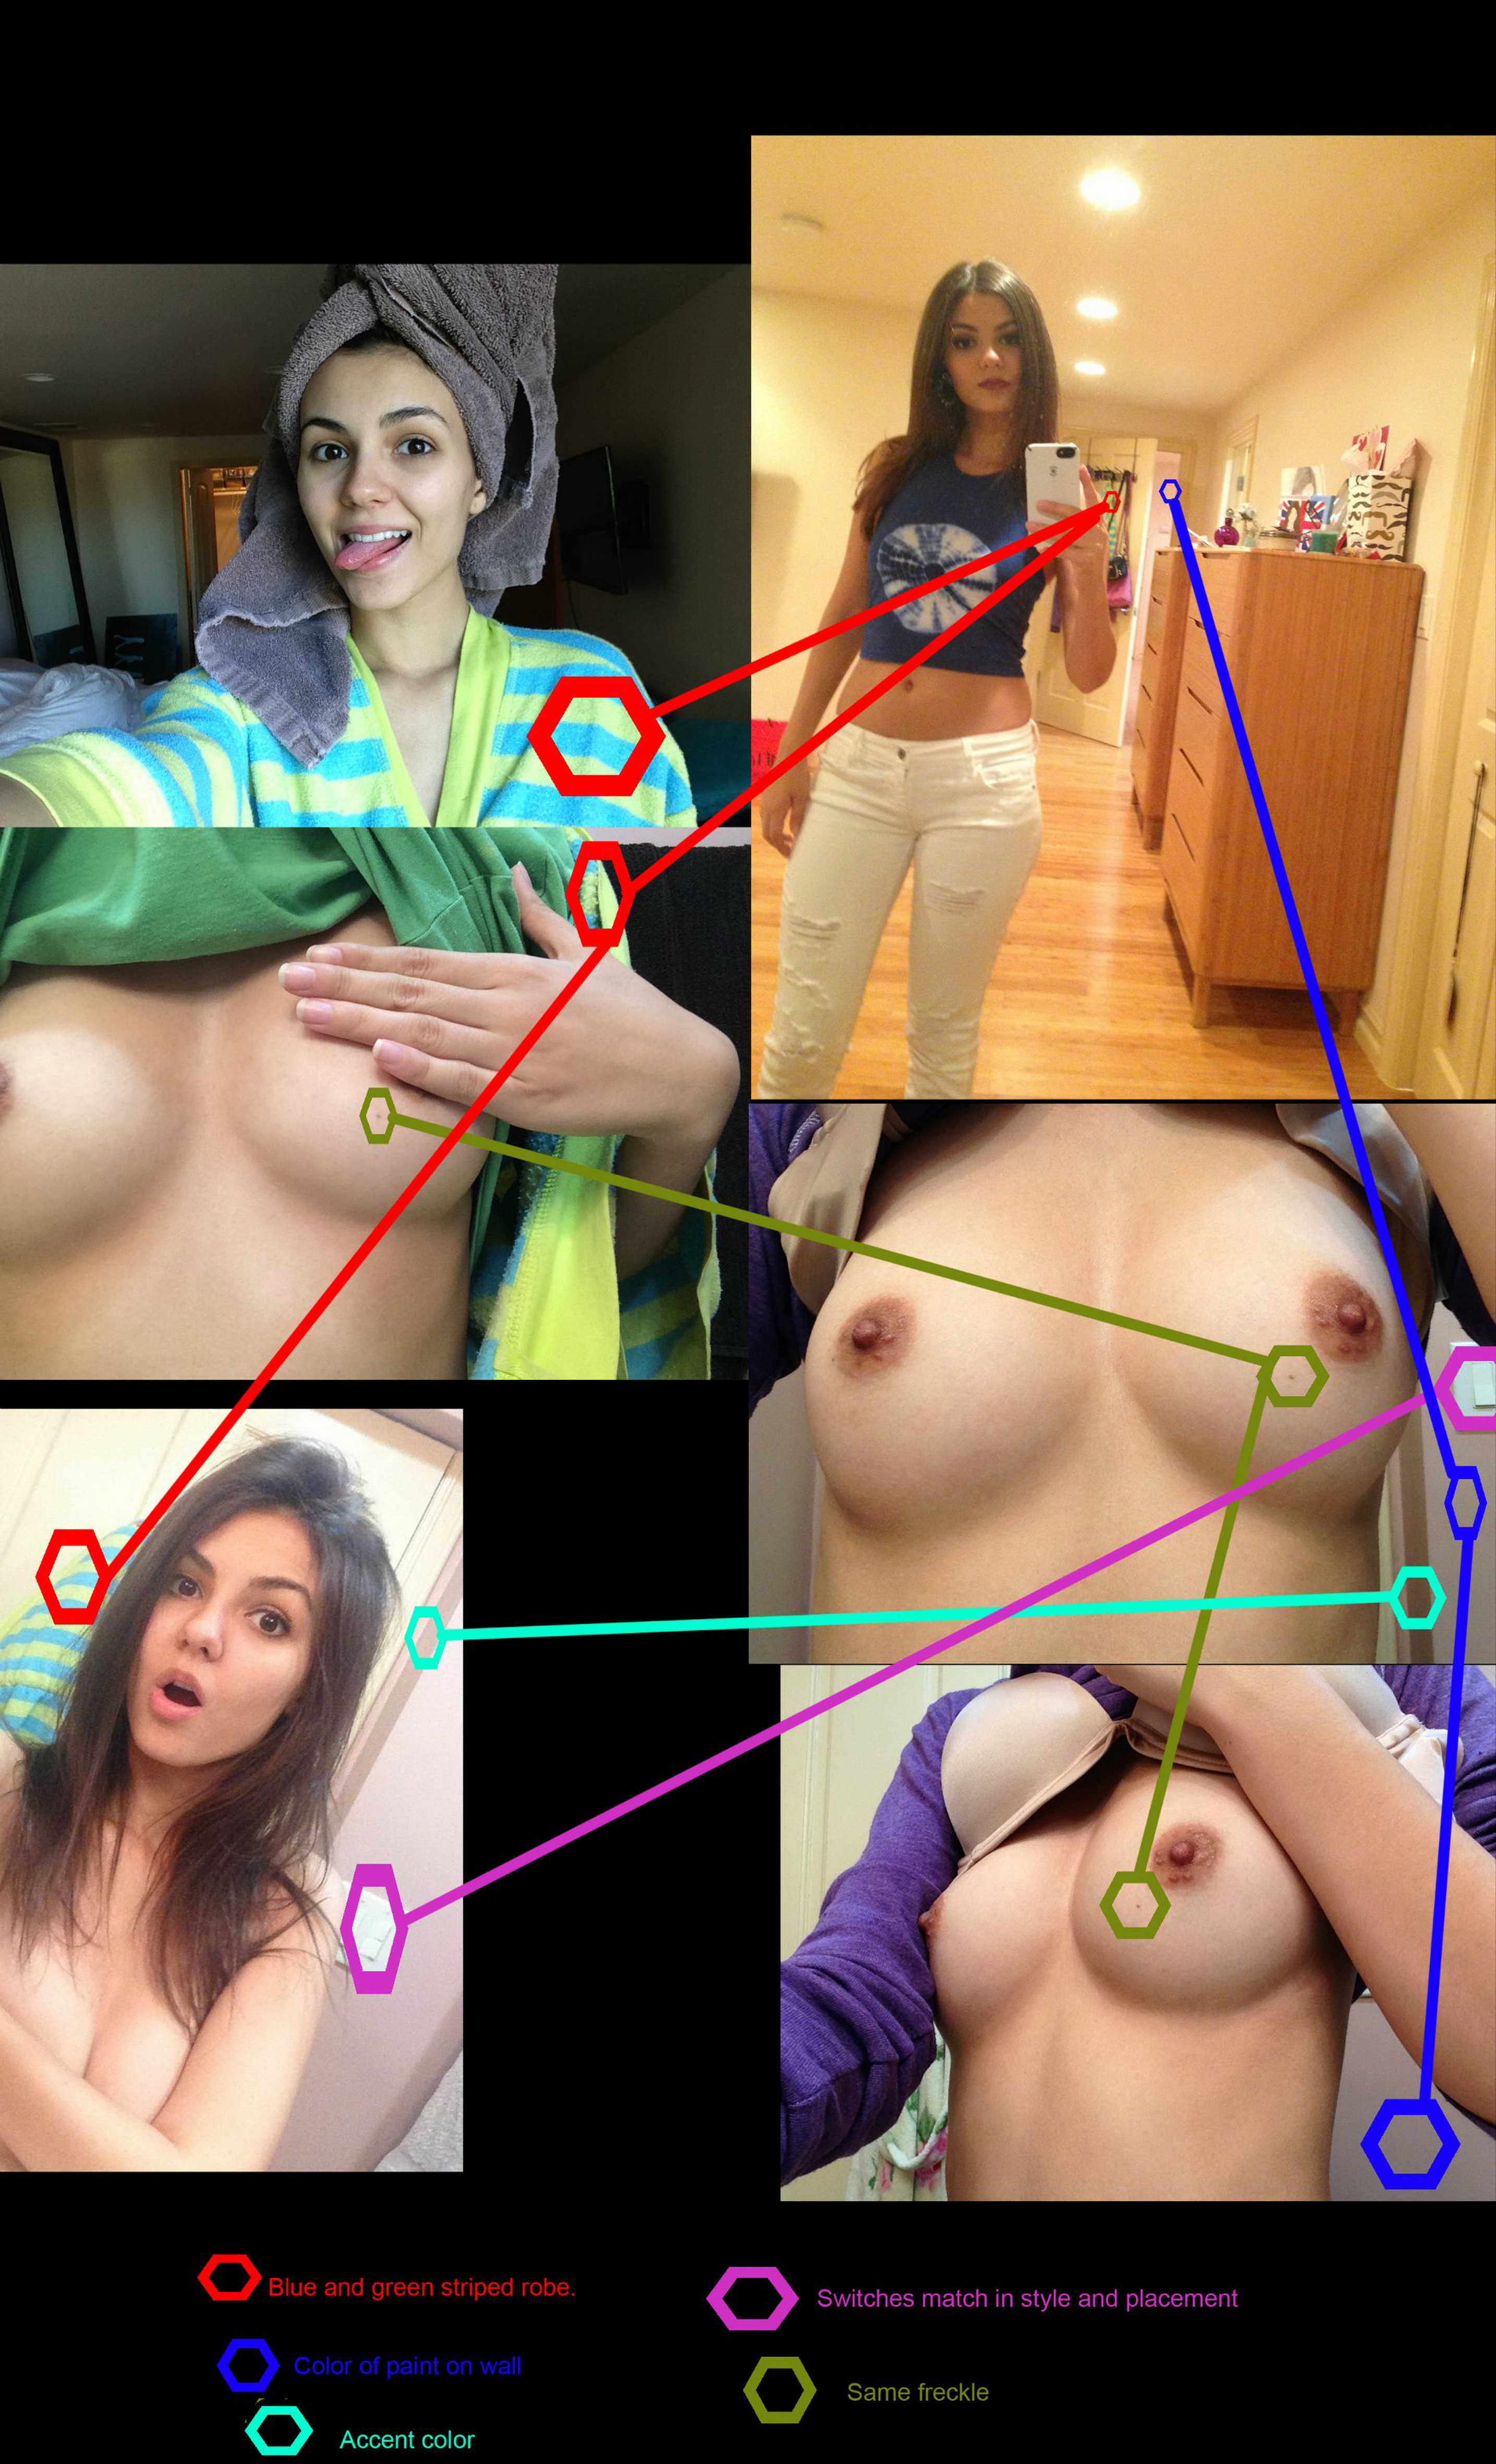 Victoria_Justice_leaked_private_nude_photo_hacked_personal_naked_pics_36x_MixQ_12.jpg